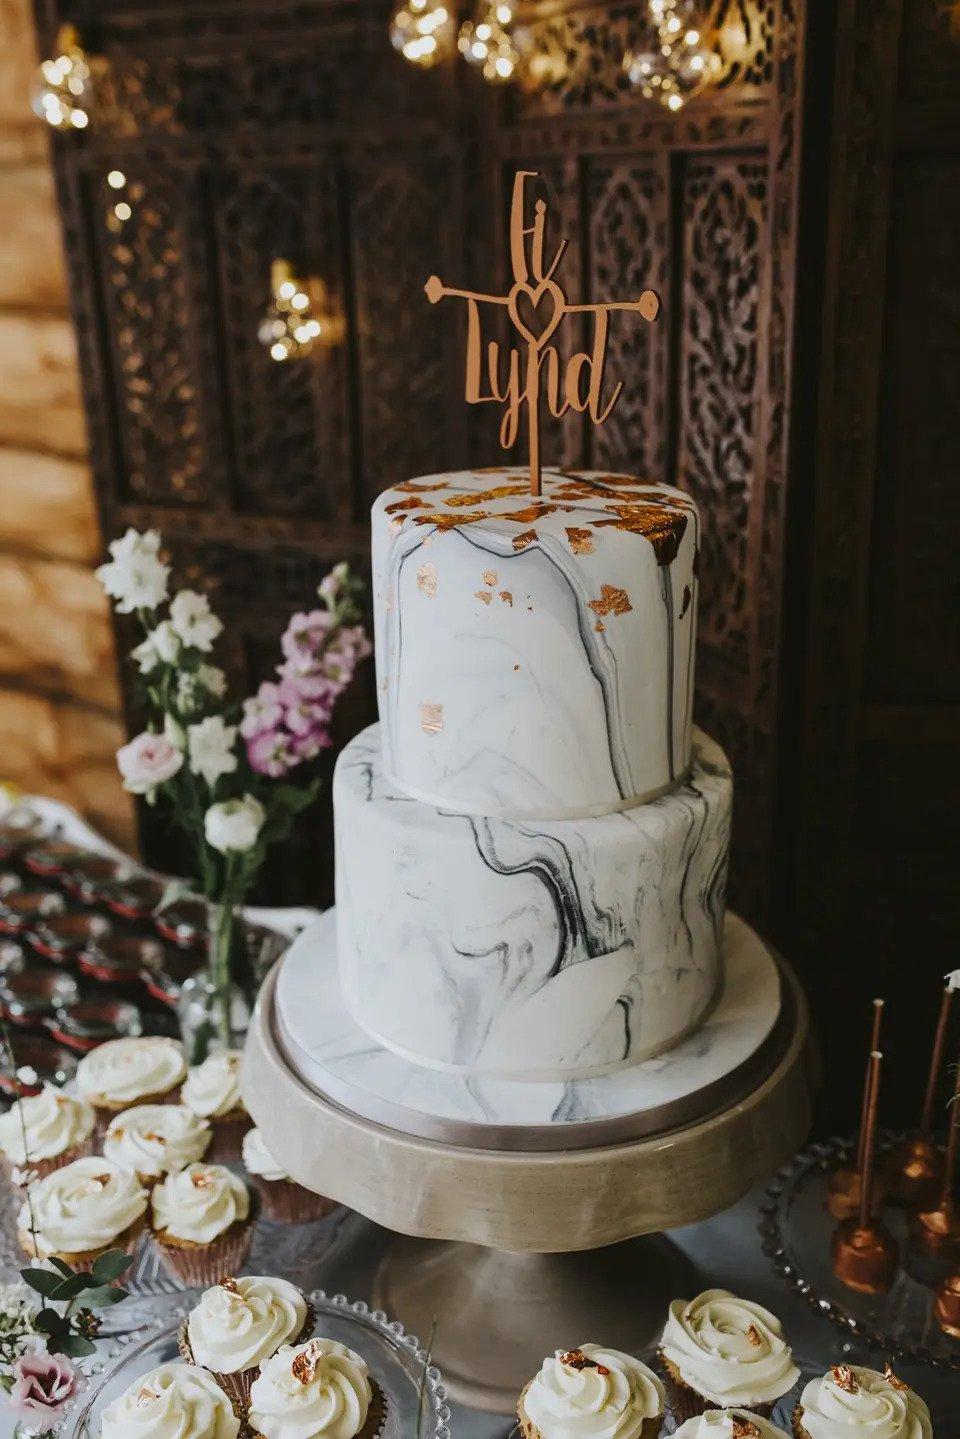 marble wedding cake with two tiers and copper golden leaf design at the top